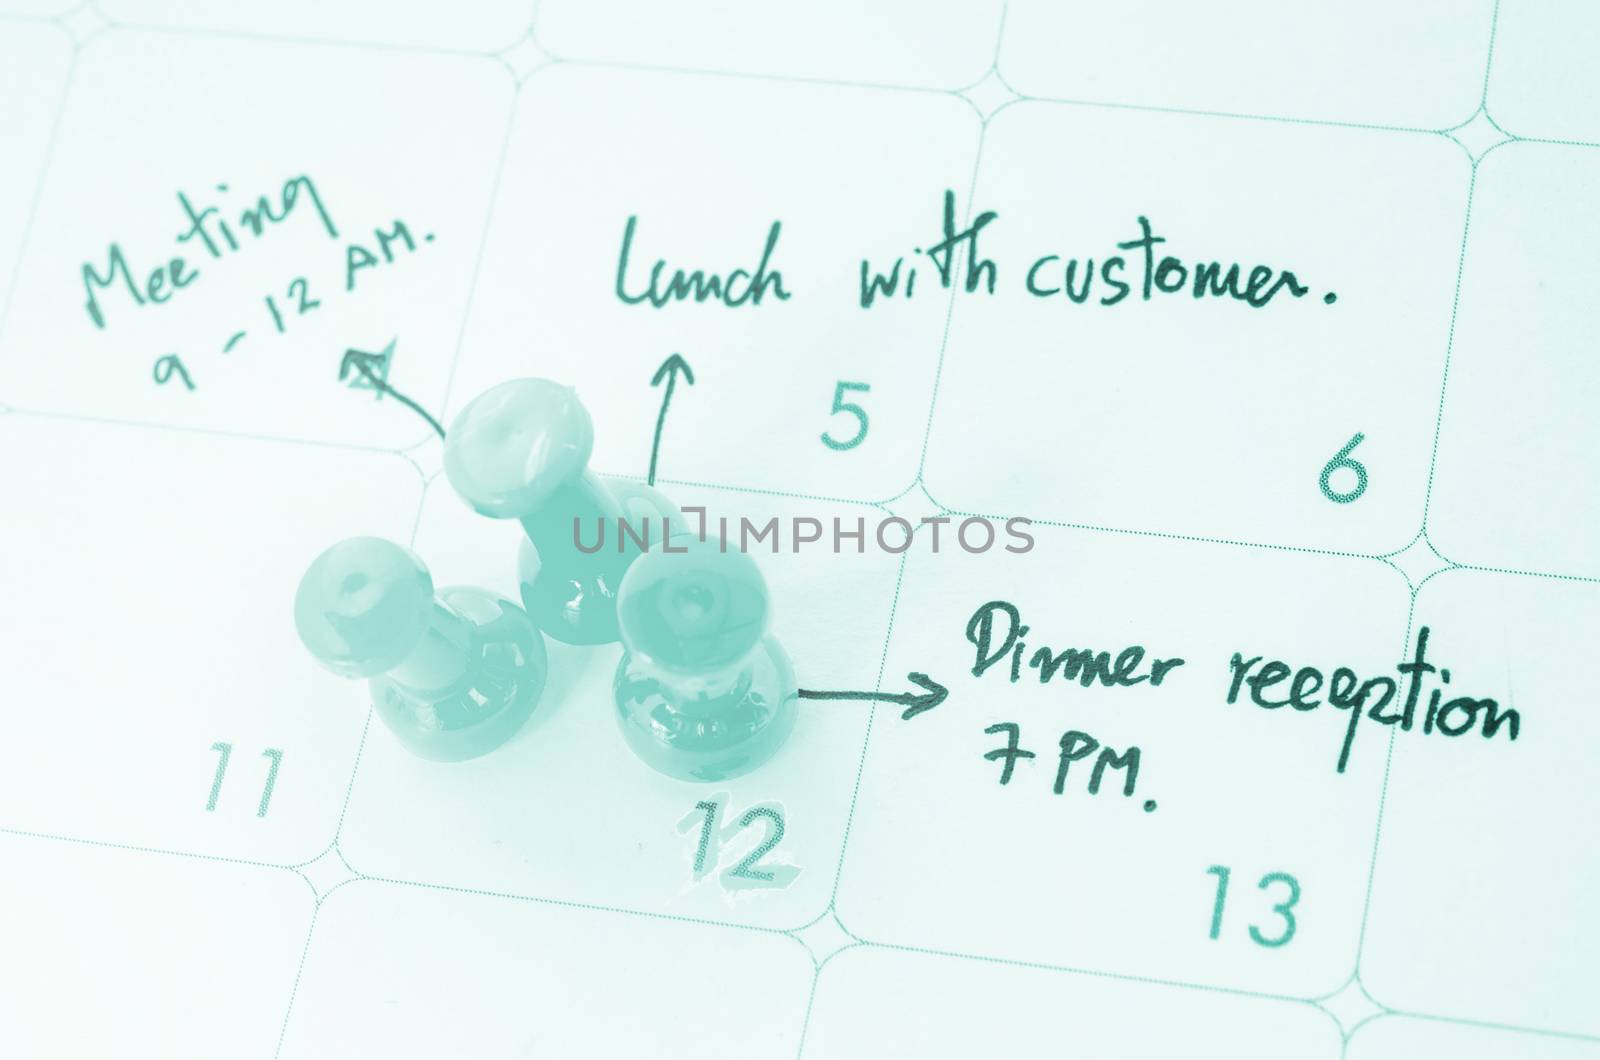 Pushpin on calendar with busy day overworked schedule.